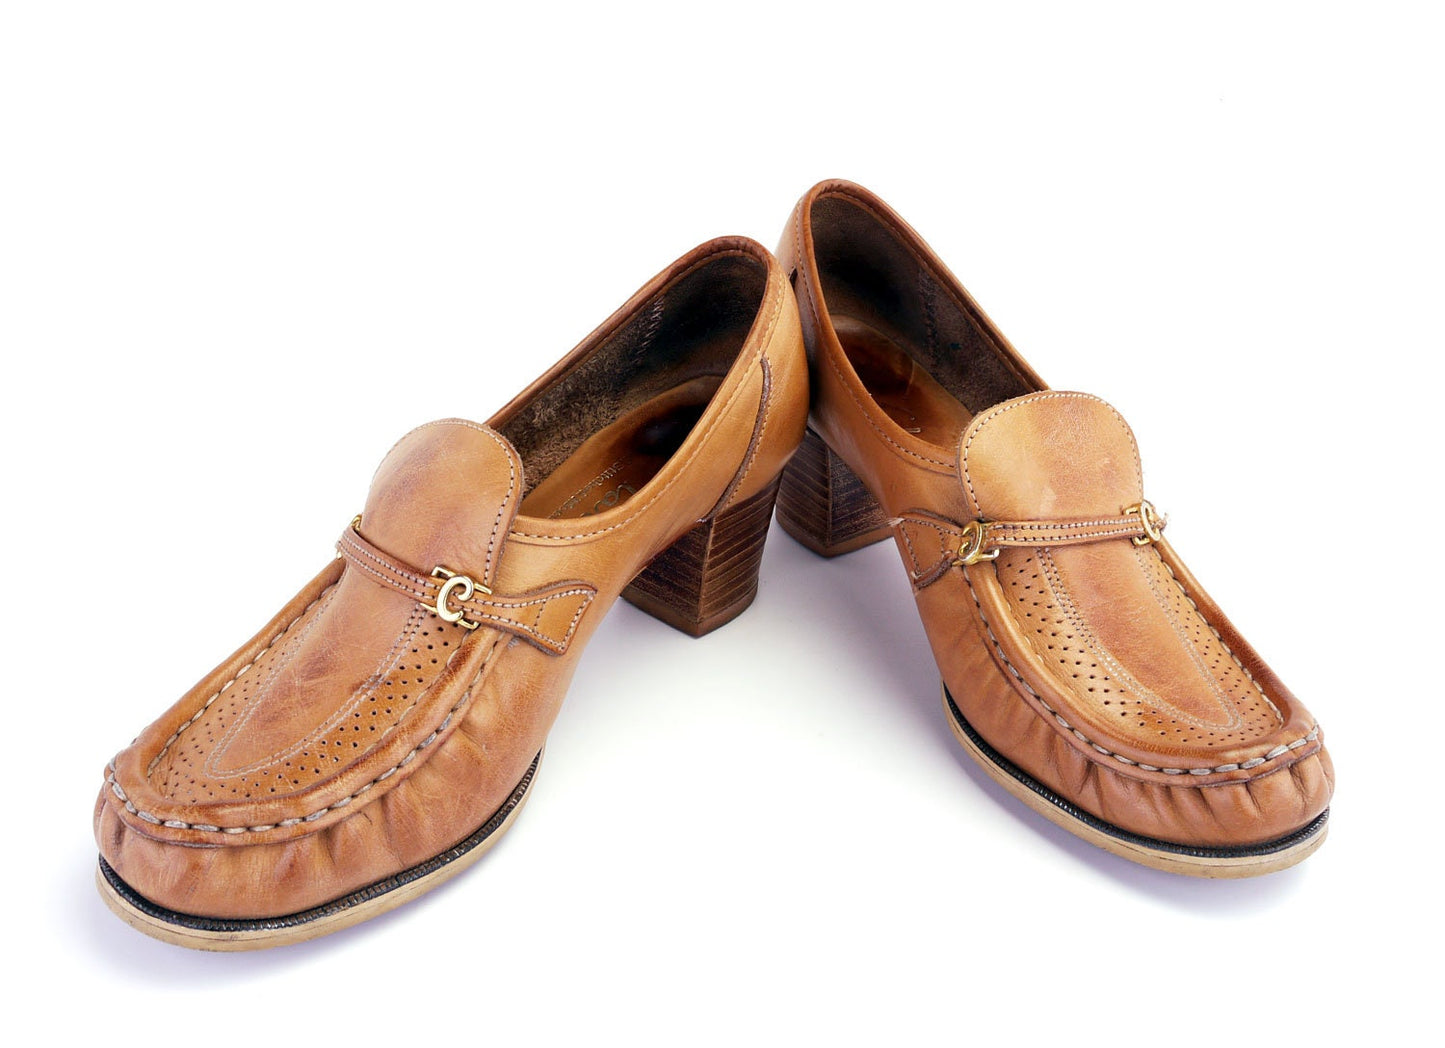 1970s Natural Tan Moccasins by Clarks UK 5